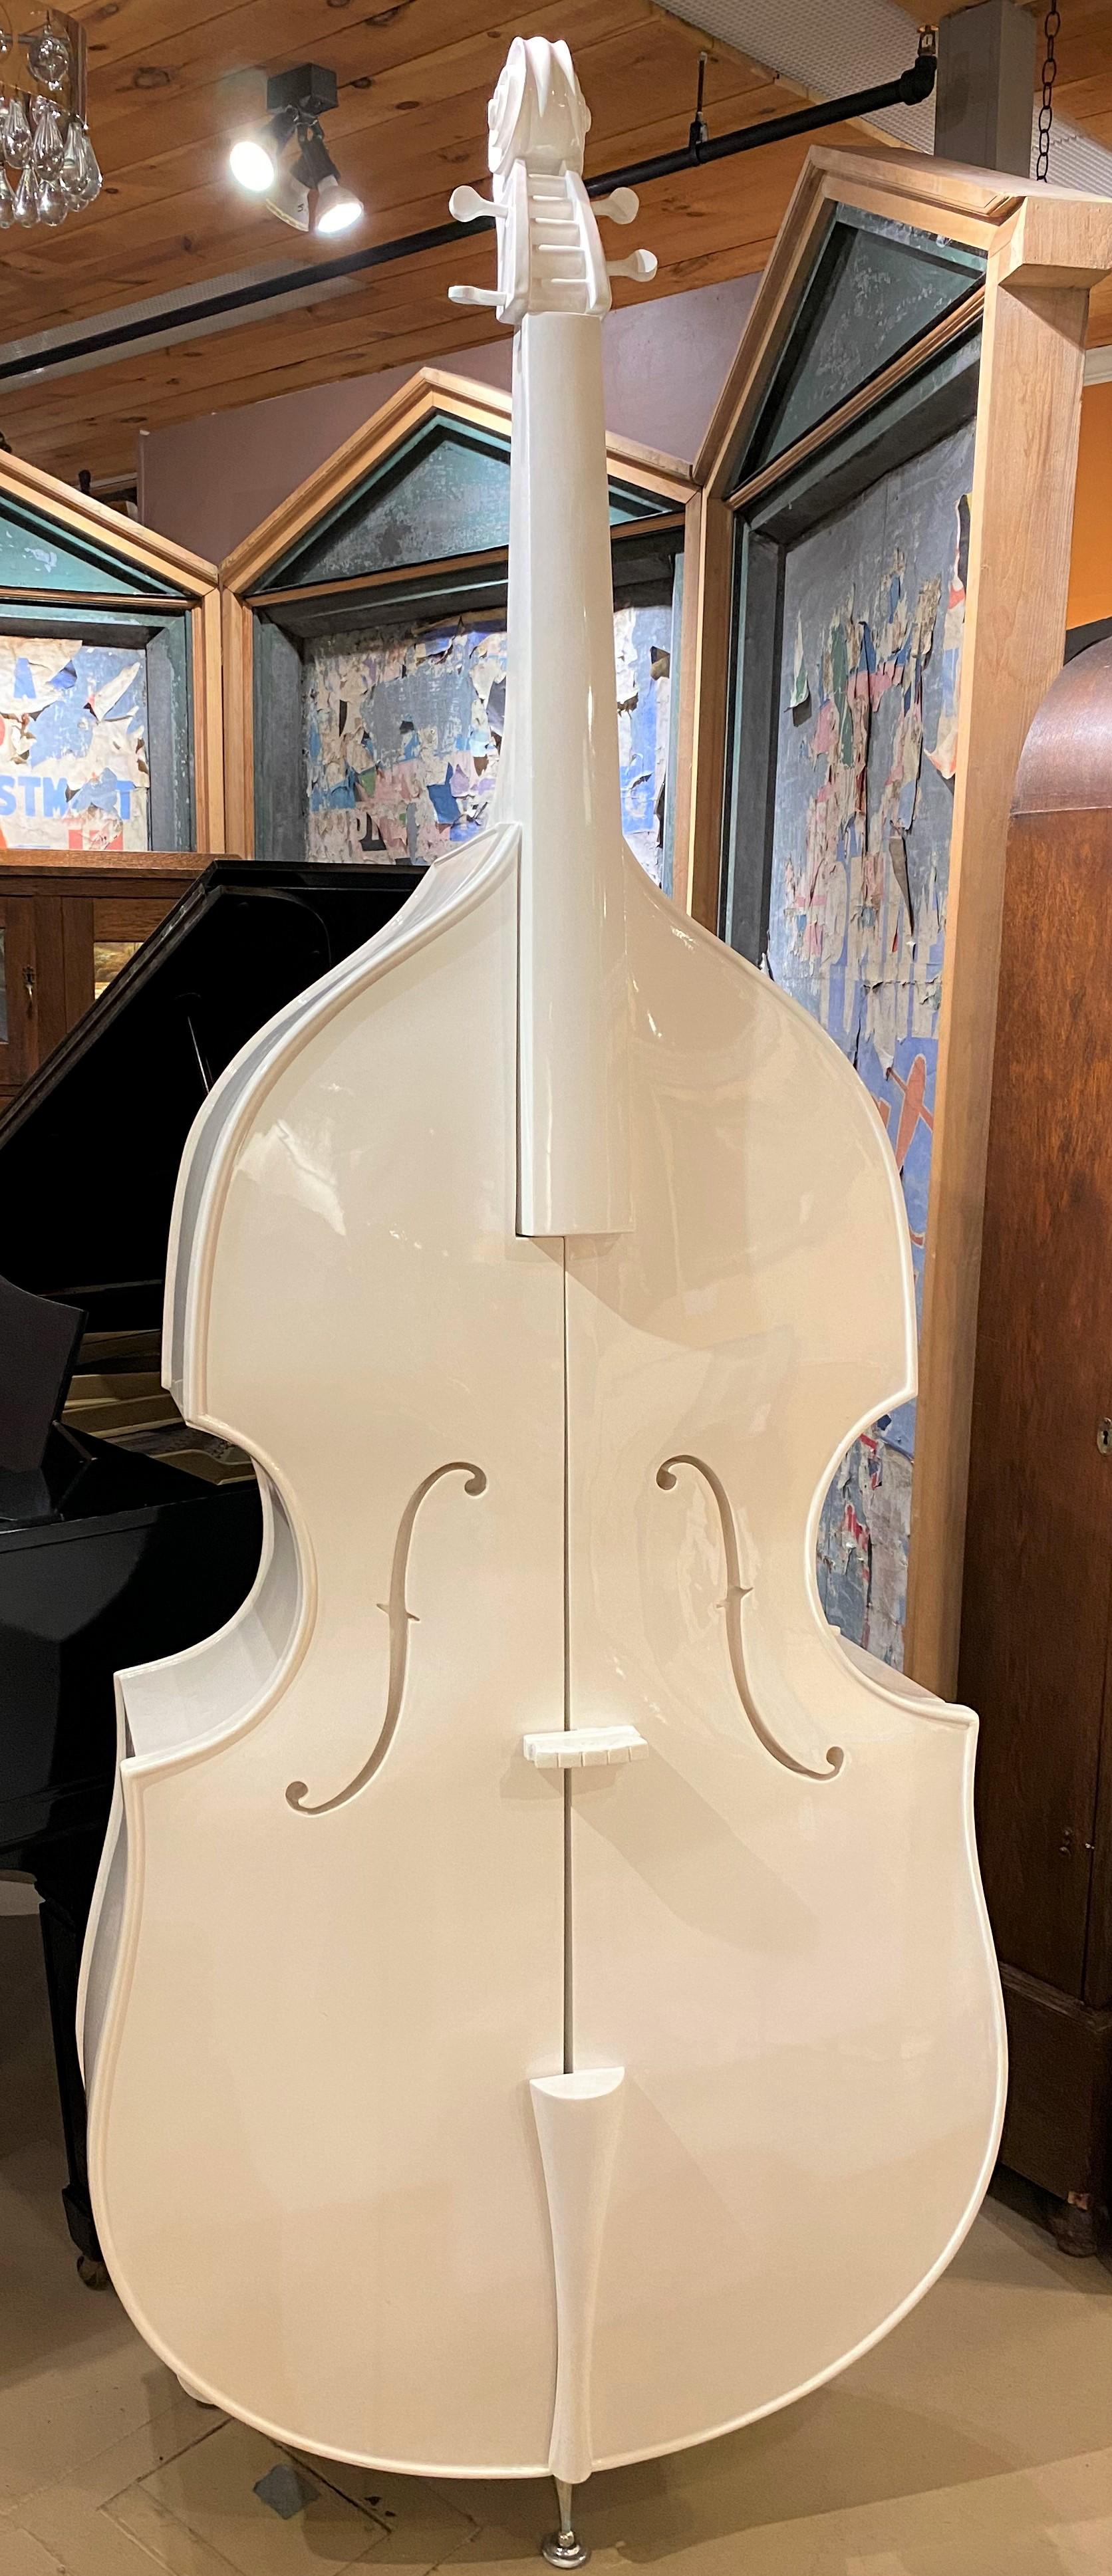 A wonderful modern double base or cello form white lacquered cabinet which slides open from the center to reveal three hidden interior shelves, supported by a front metal foot and two rear wooden feet. Dates to the the late 20th century and is in